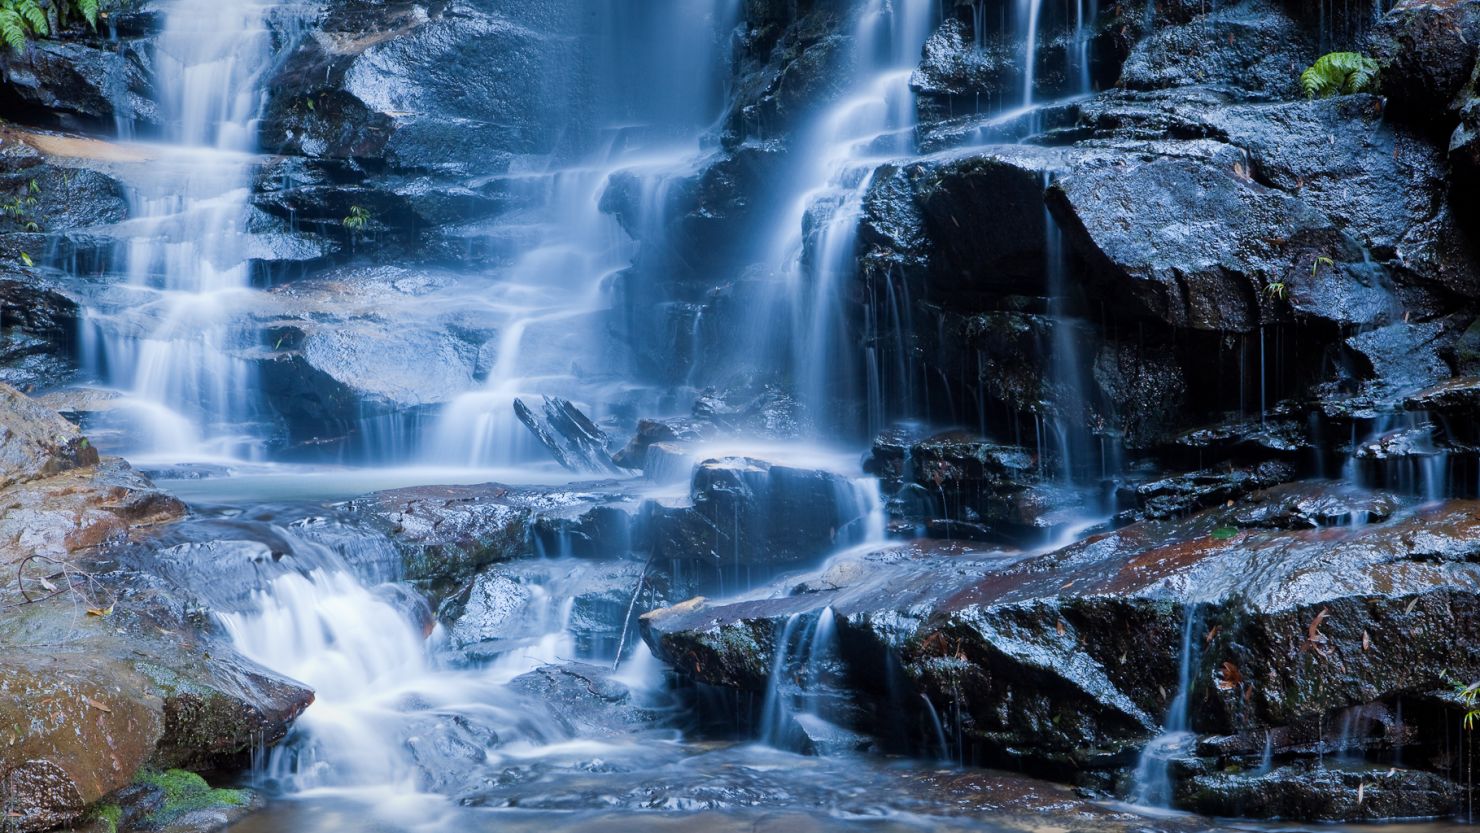 From mountains to waterfalls, see the best of Sydney's natural beauty.